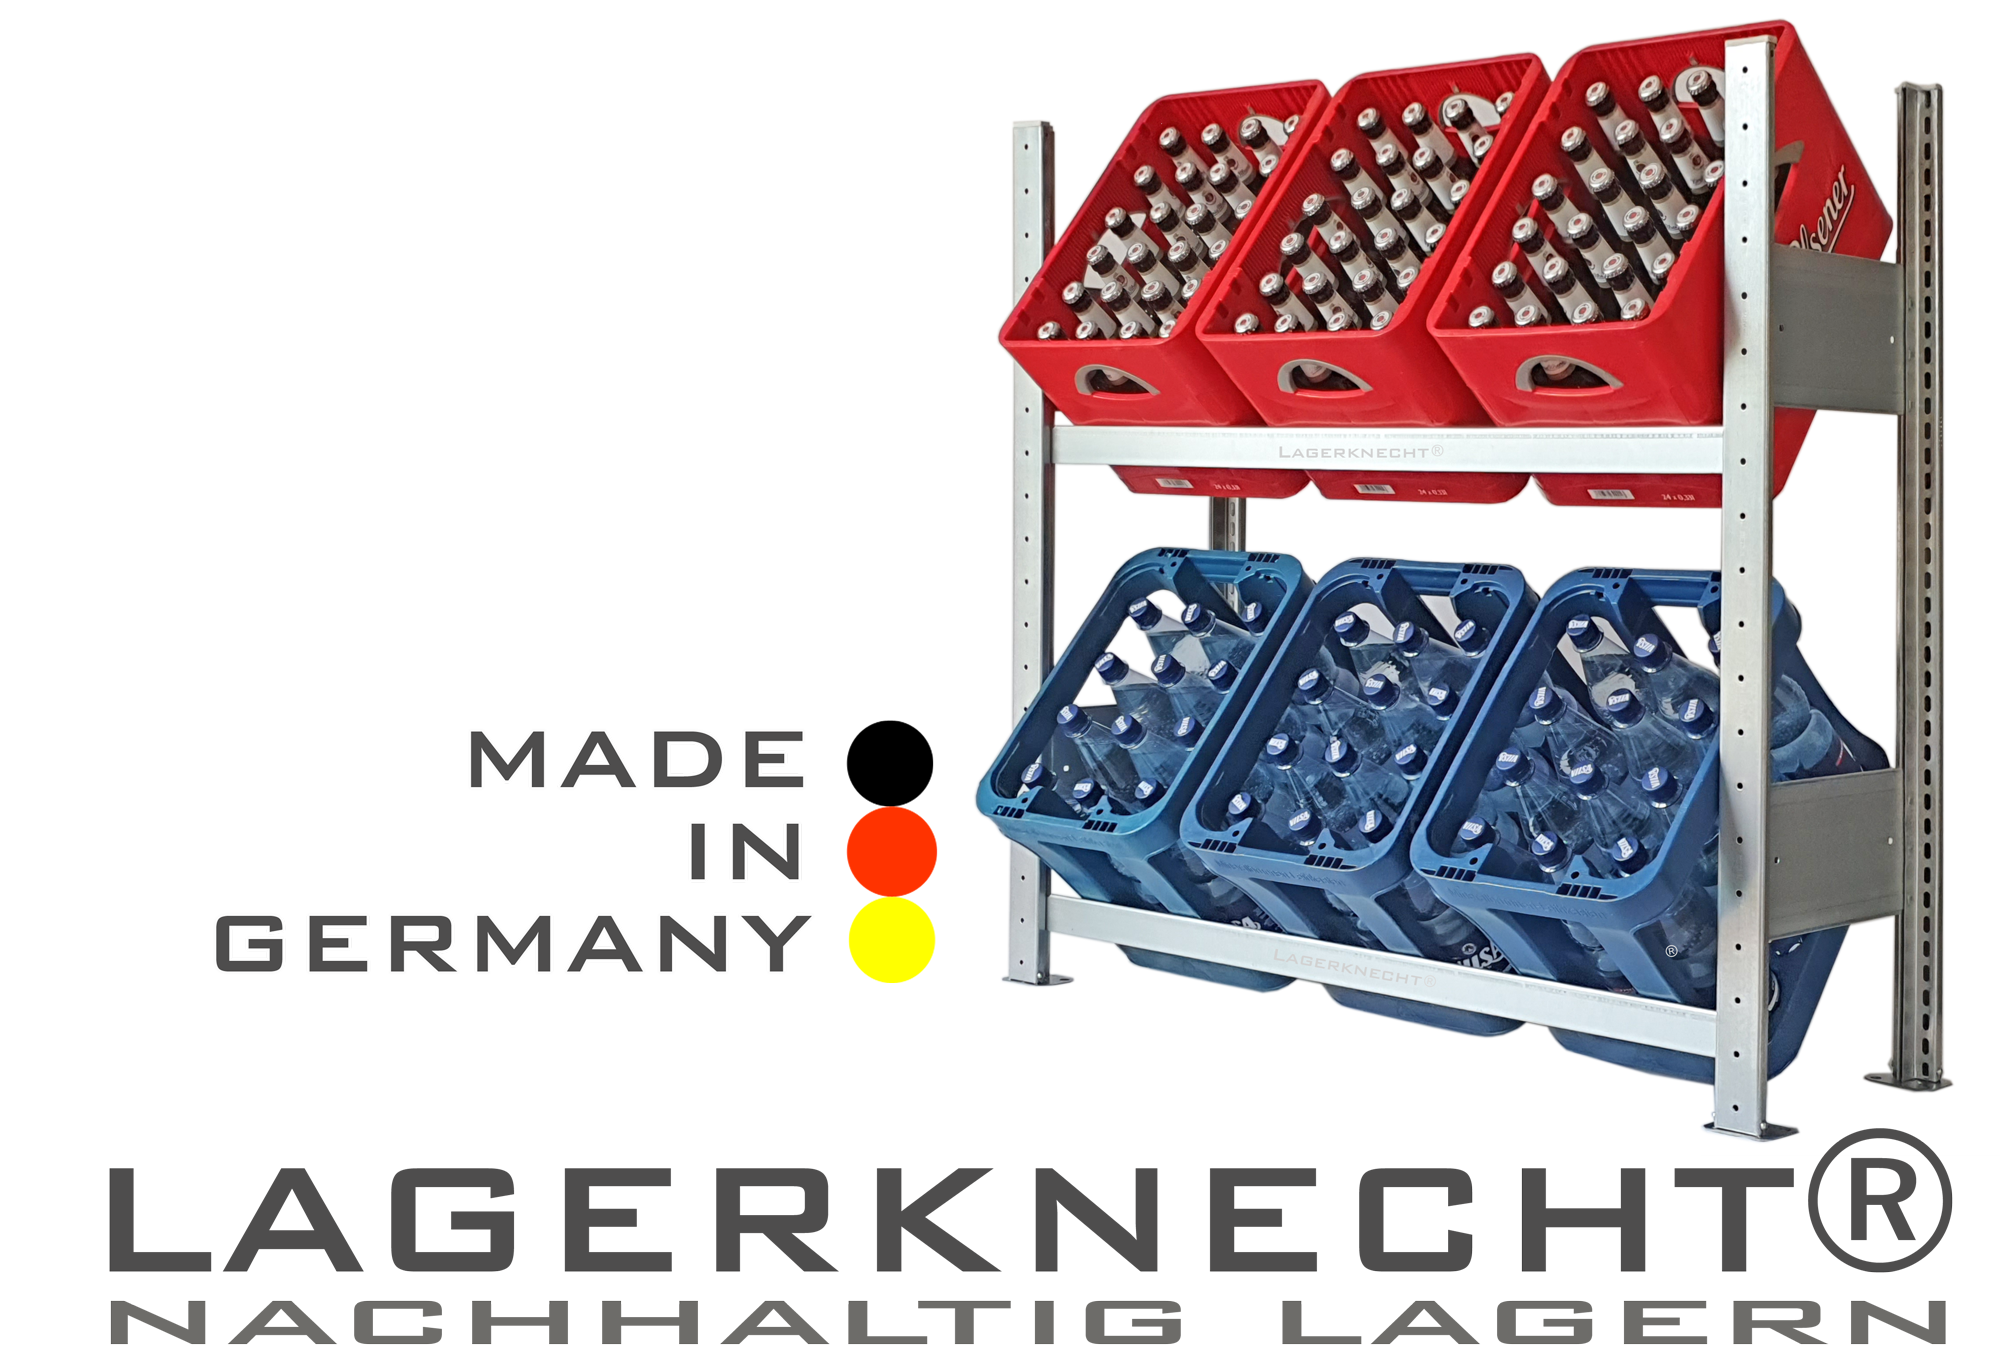 Logo-Lagerknecht-made-frei-na.png